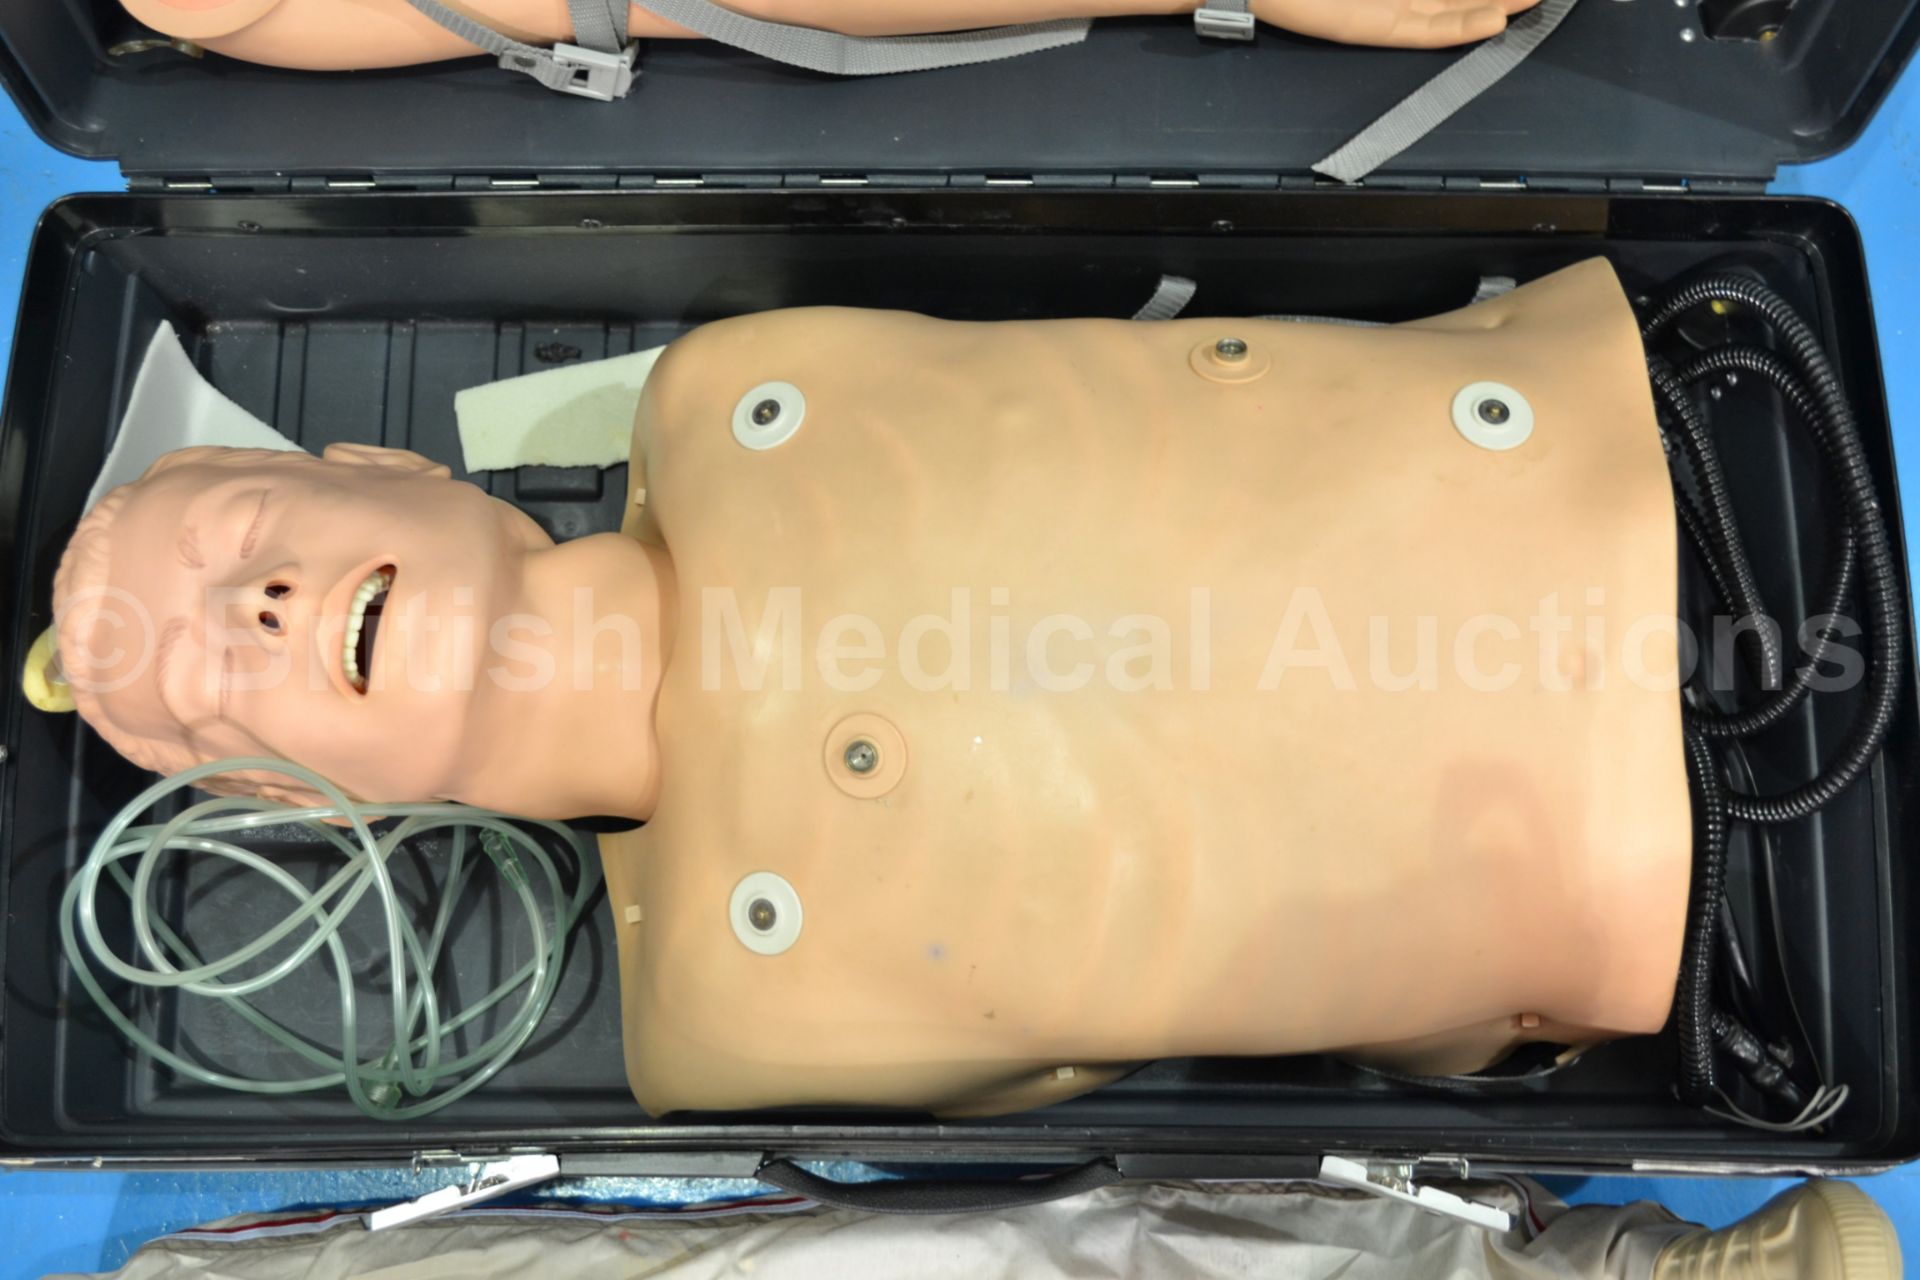 Laerdal ALS Skill Trainer (Good Condition) - Image 2 of 5